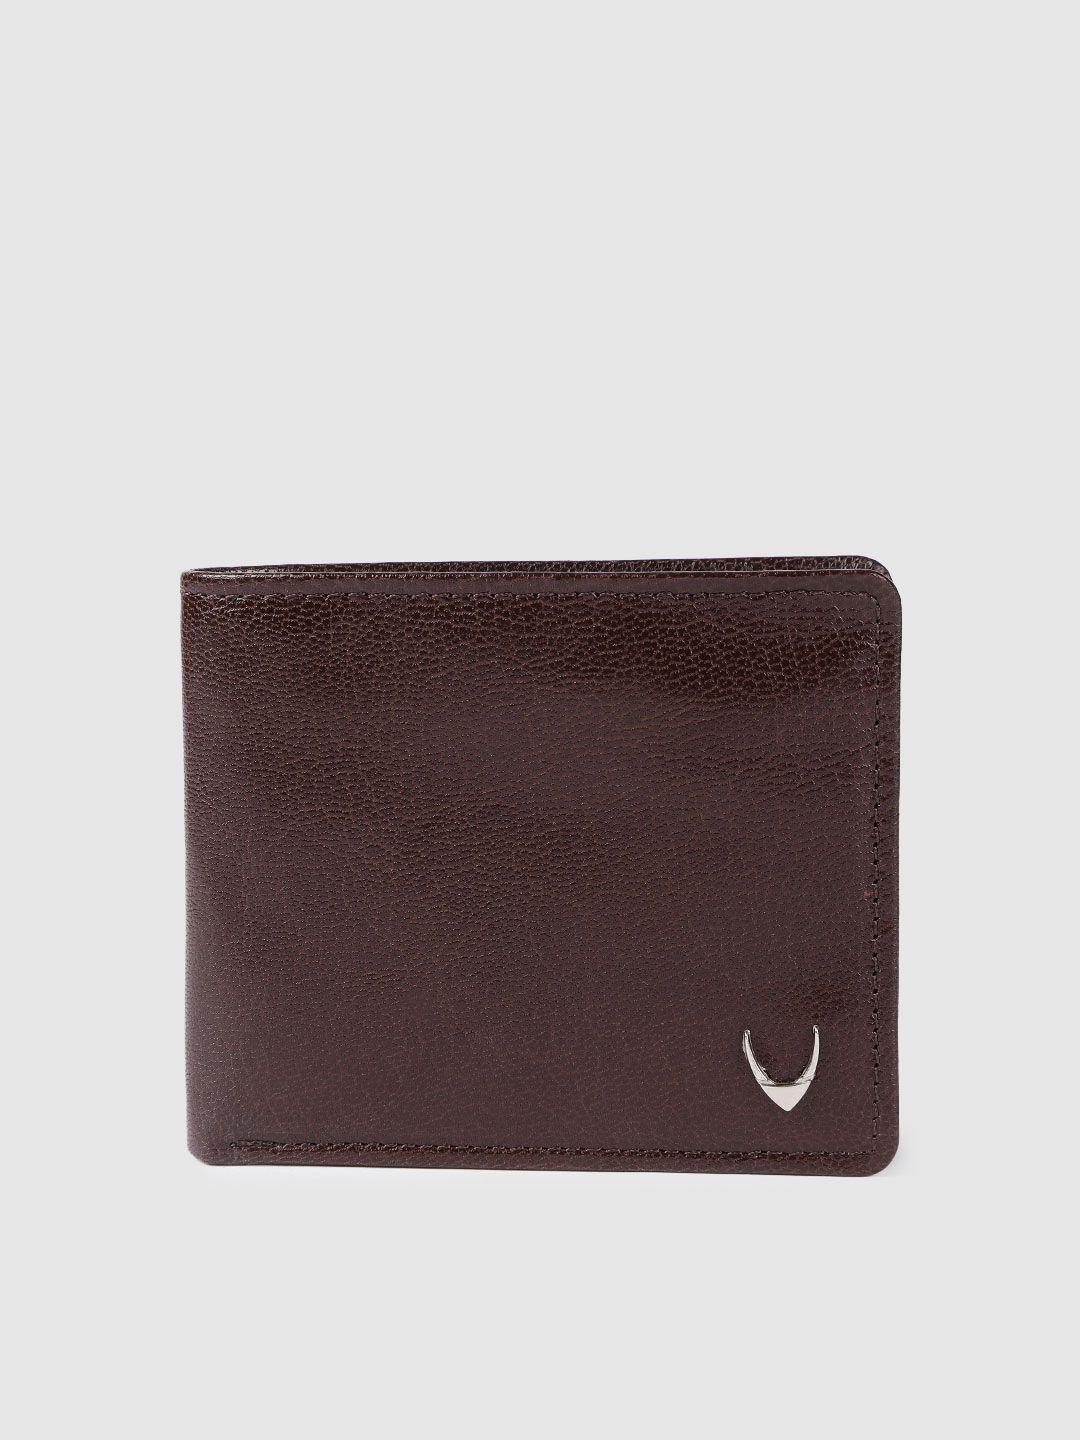 hidesign-men-brown-leather-two-fold-wallet